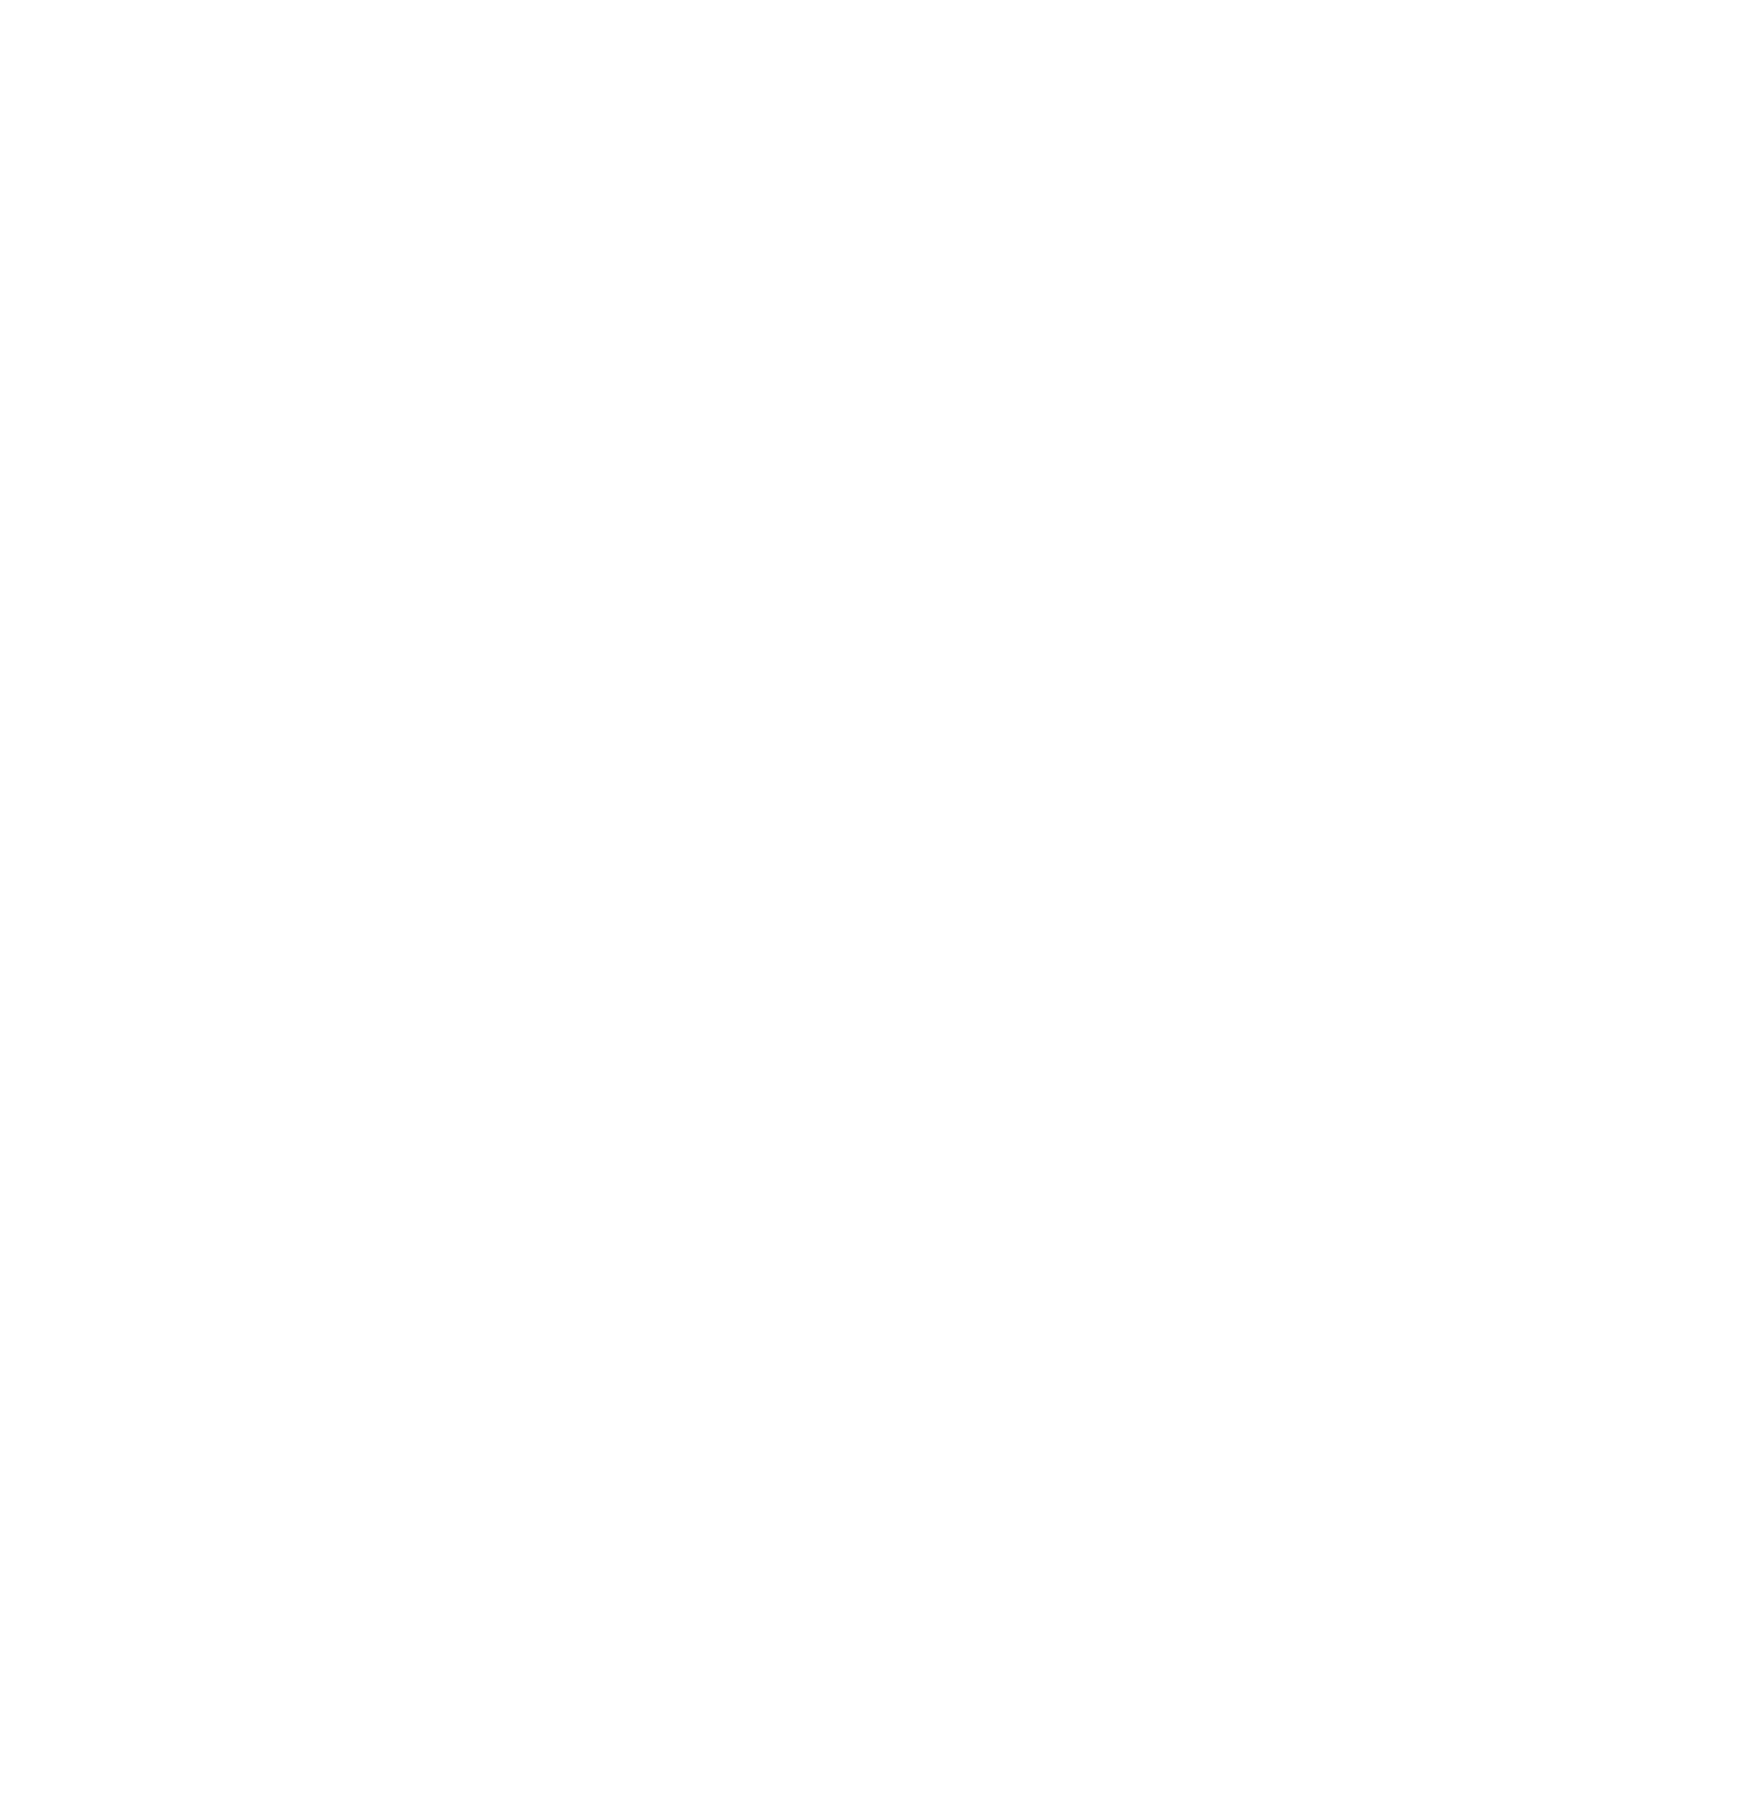 Brentwood group classes home. Dumbbell clipart gym tool